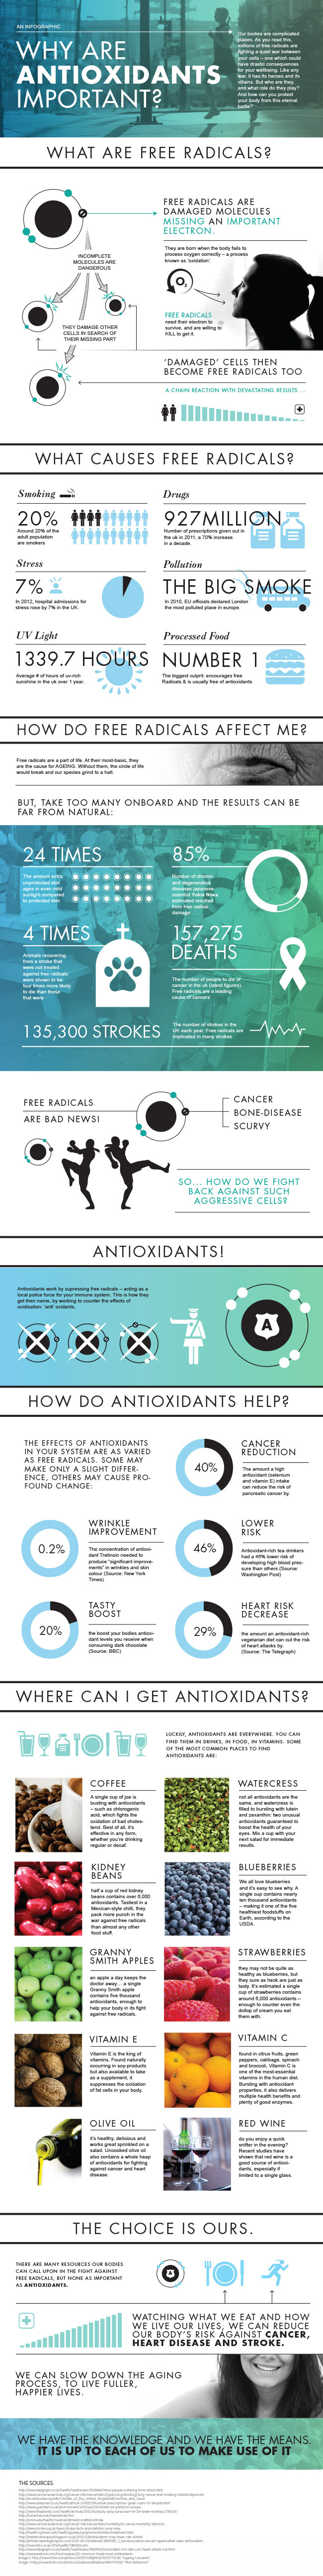 Why Are Antioxidants So Important? Infographic